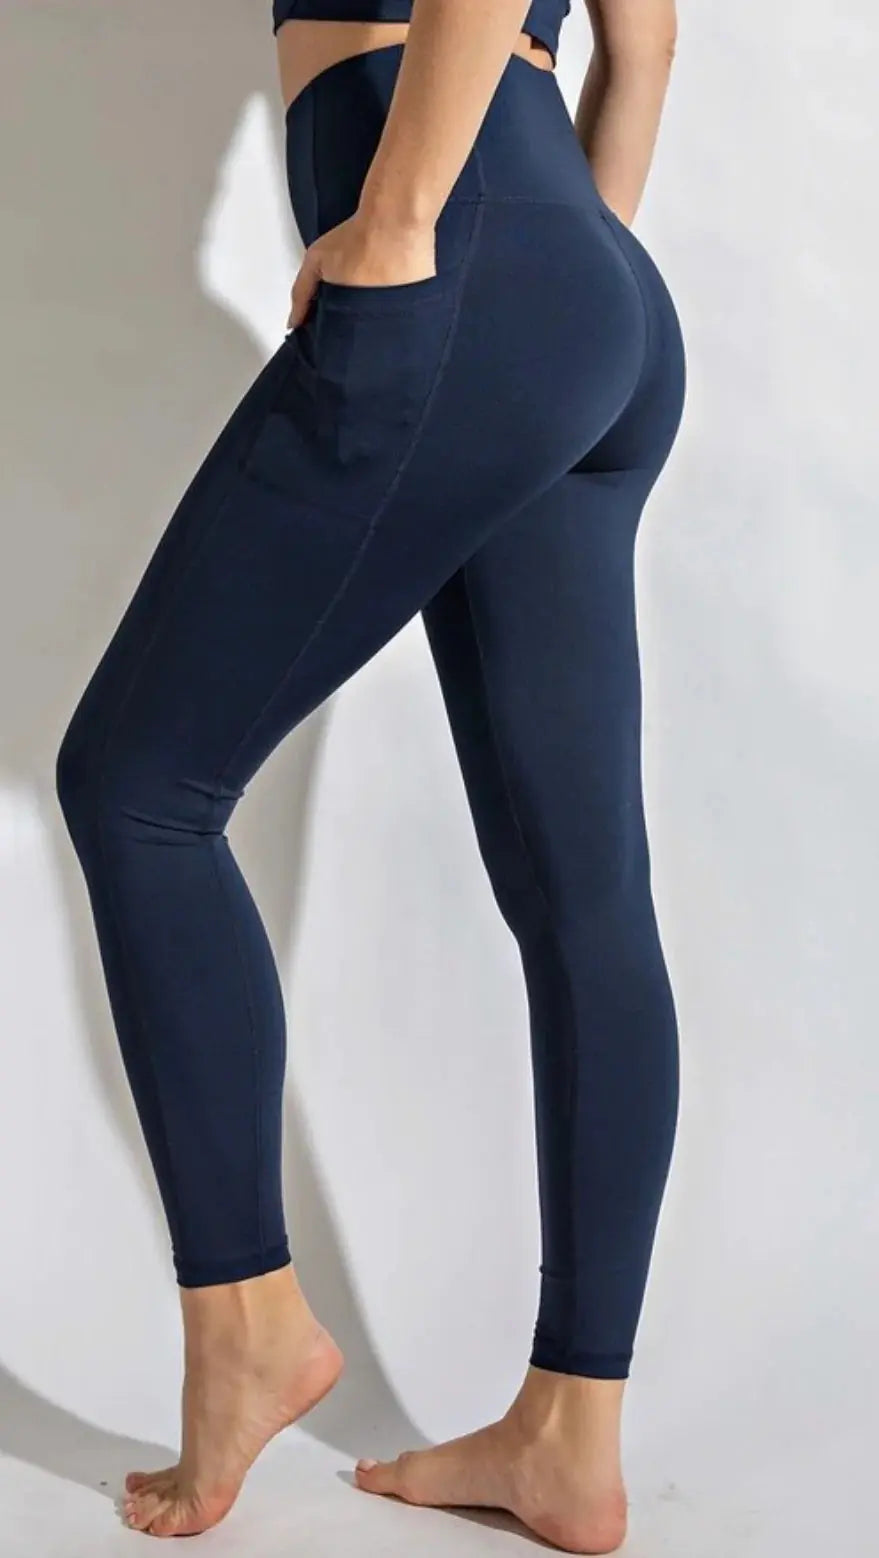 Buttery-Soft Solid Navy Pocket Leggings-leggings-Whimsies-Styled by Steph-Women's Fashion Clothing Boutique, Indiana